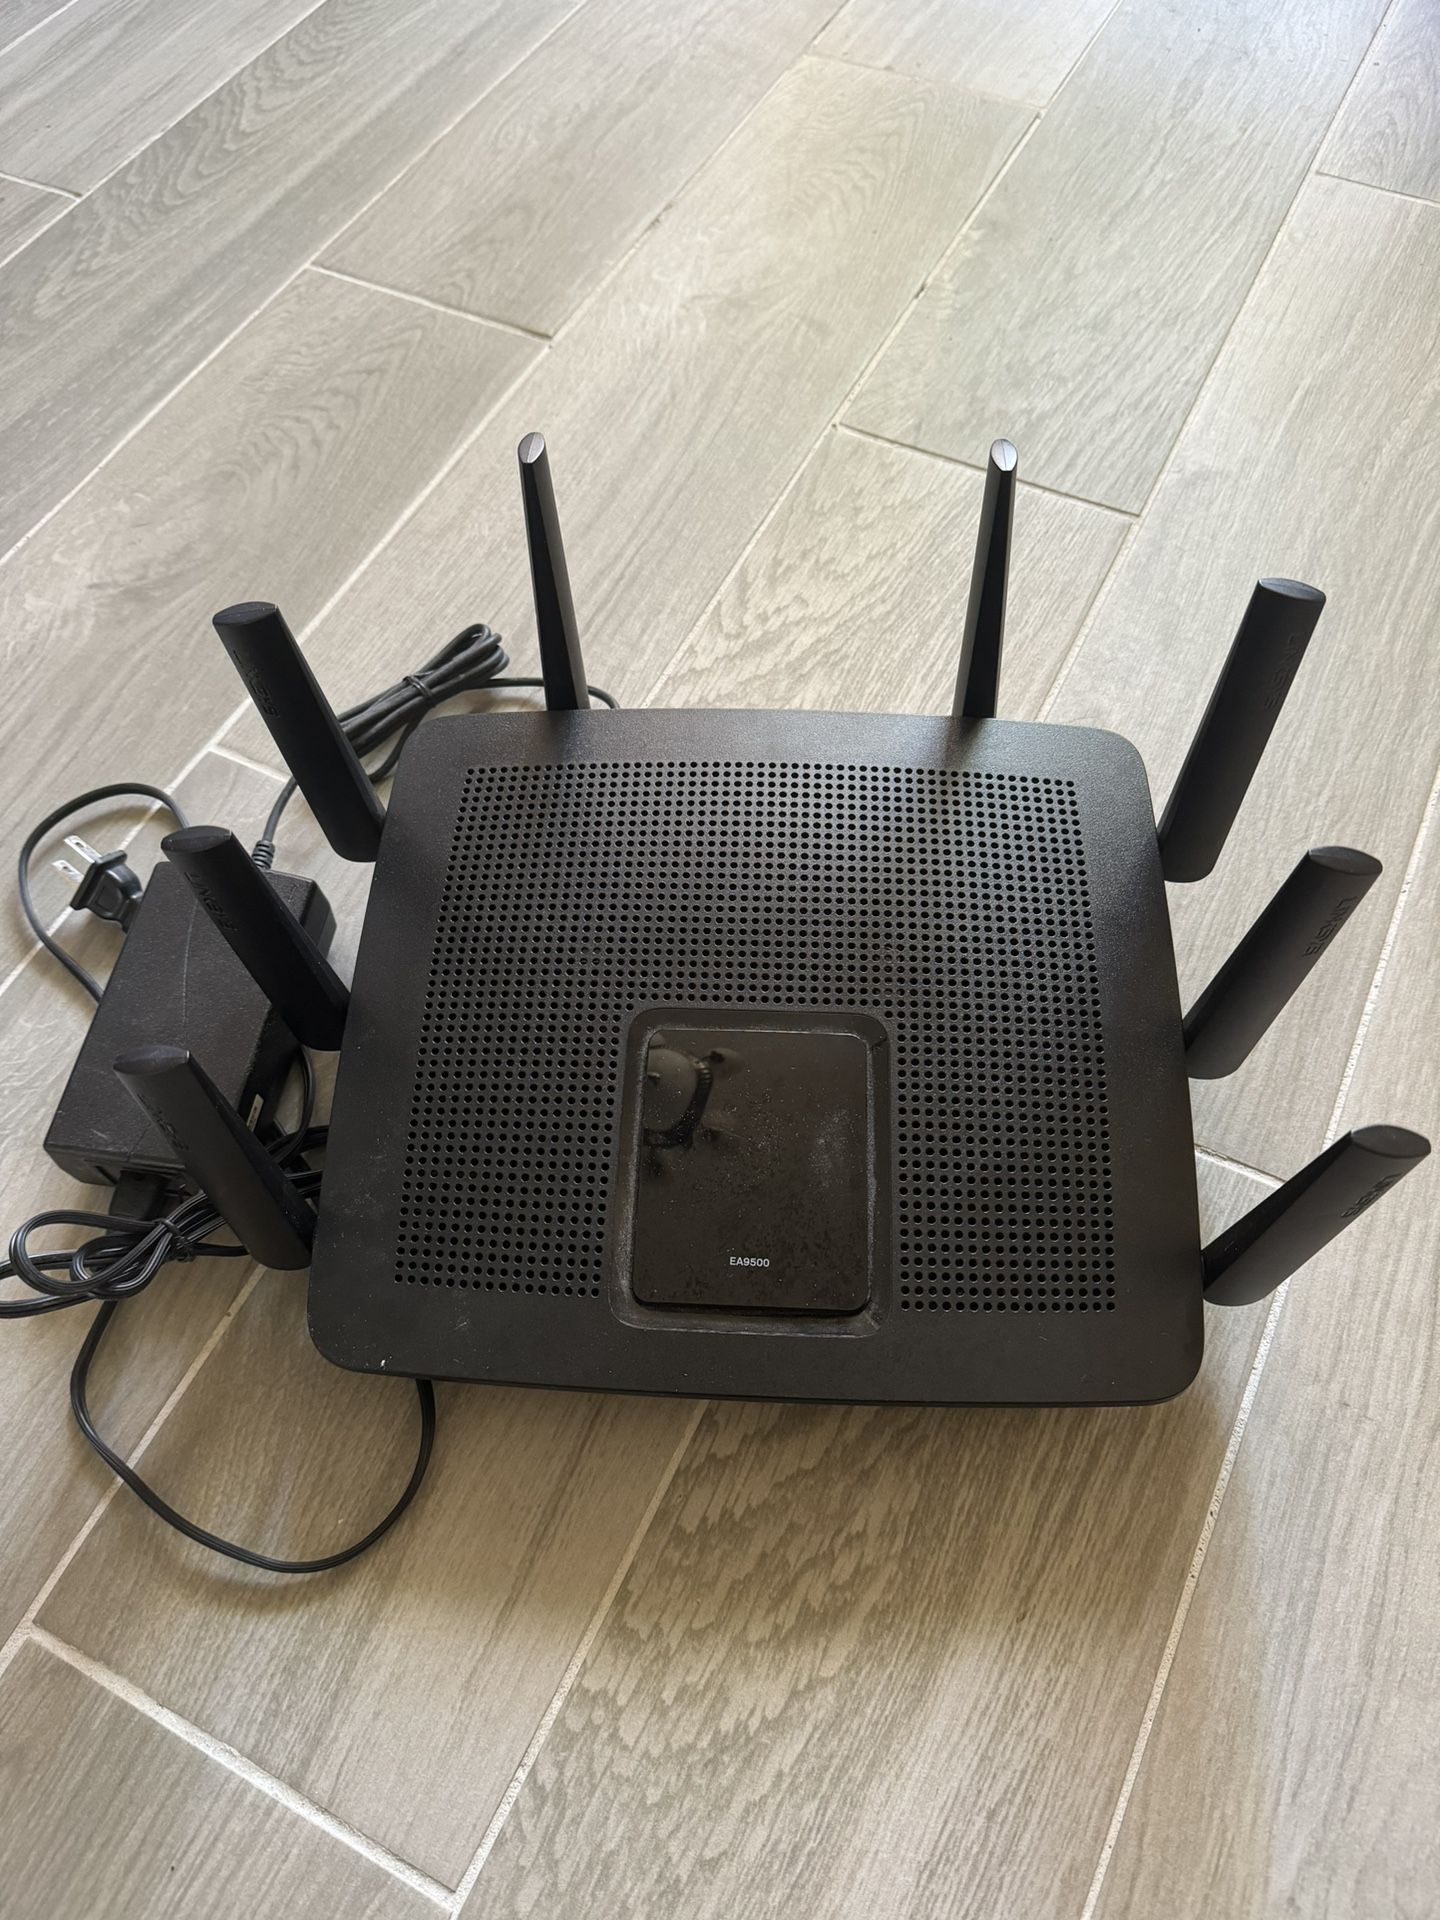 Linksys EA9500 Wireless Router 